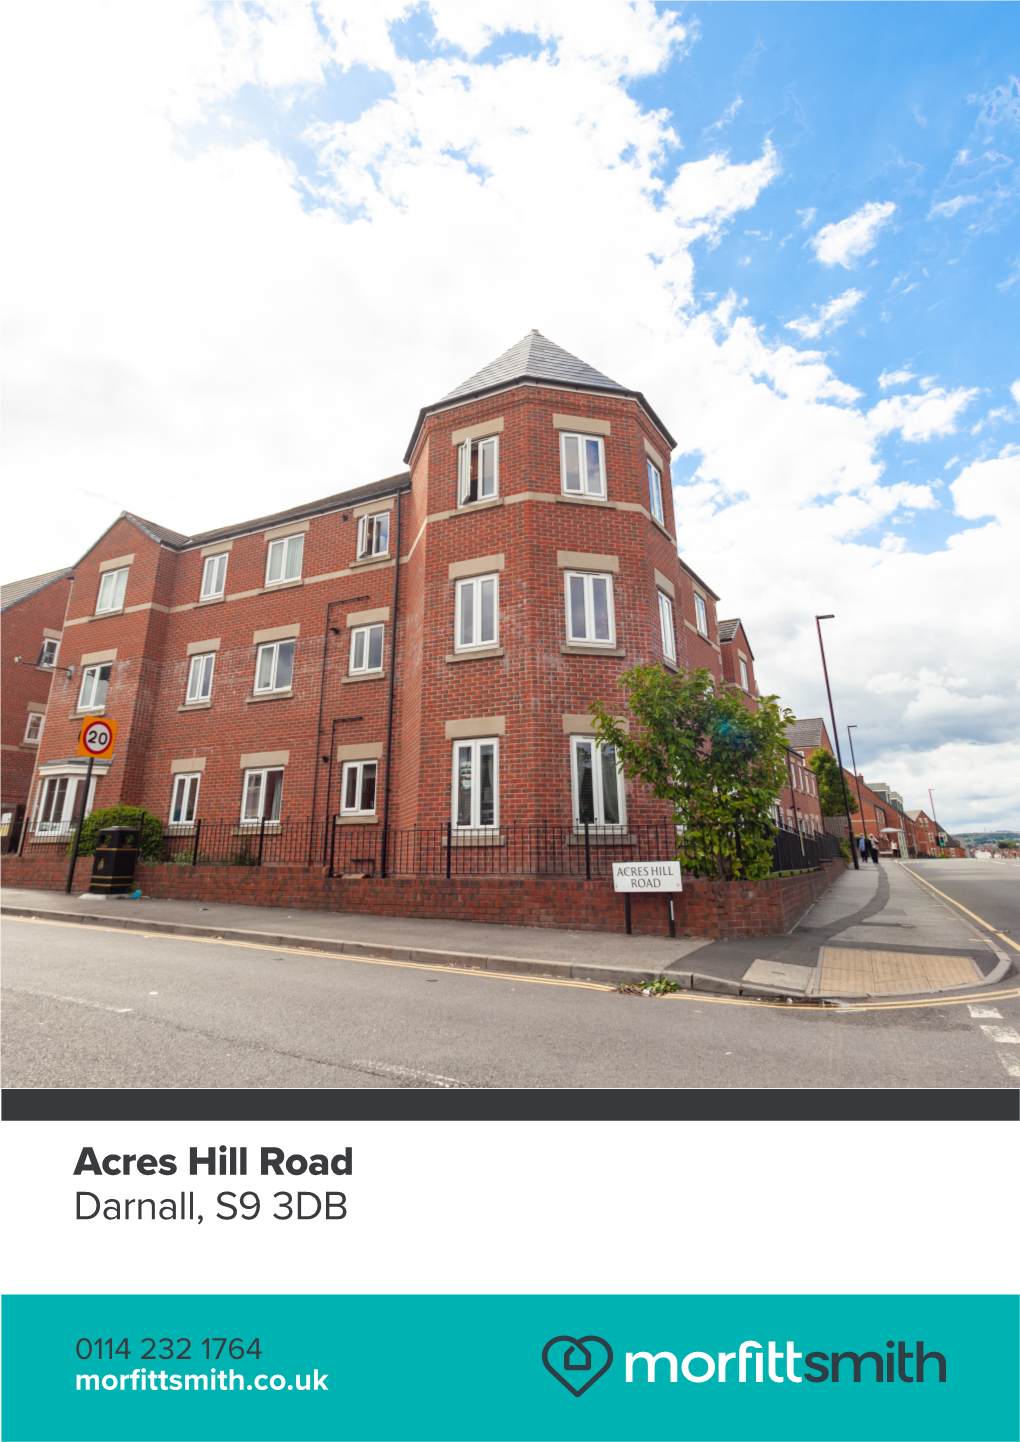 Acres Hill Road Darnall, S9 3DB